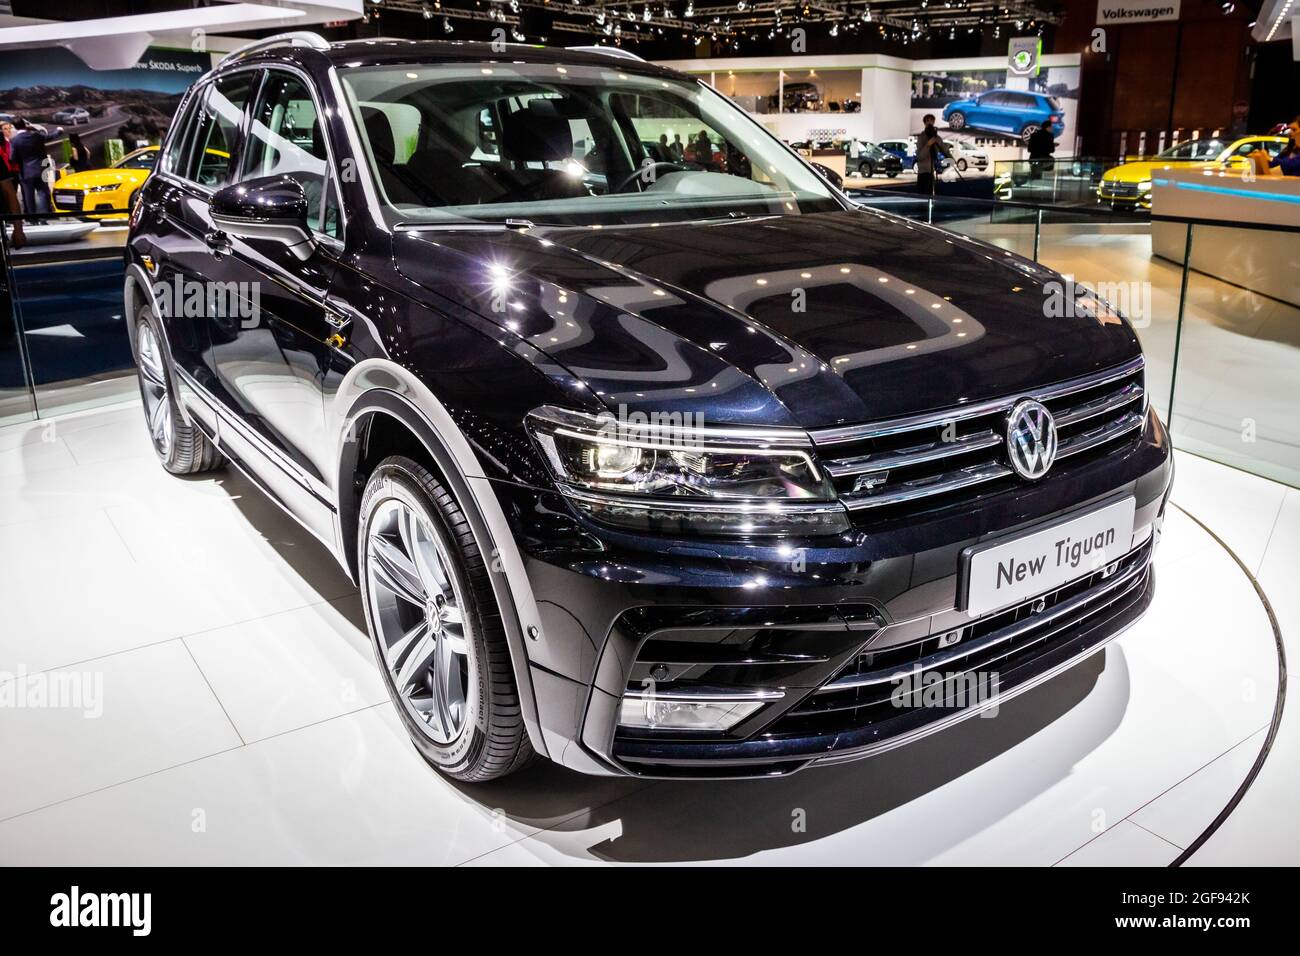 Volkswagen Tiguan car showcased at the Brussels Expo Autosalon motor show. Belgium - January 12, 2016 Stock Photo